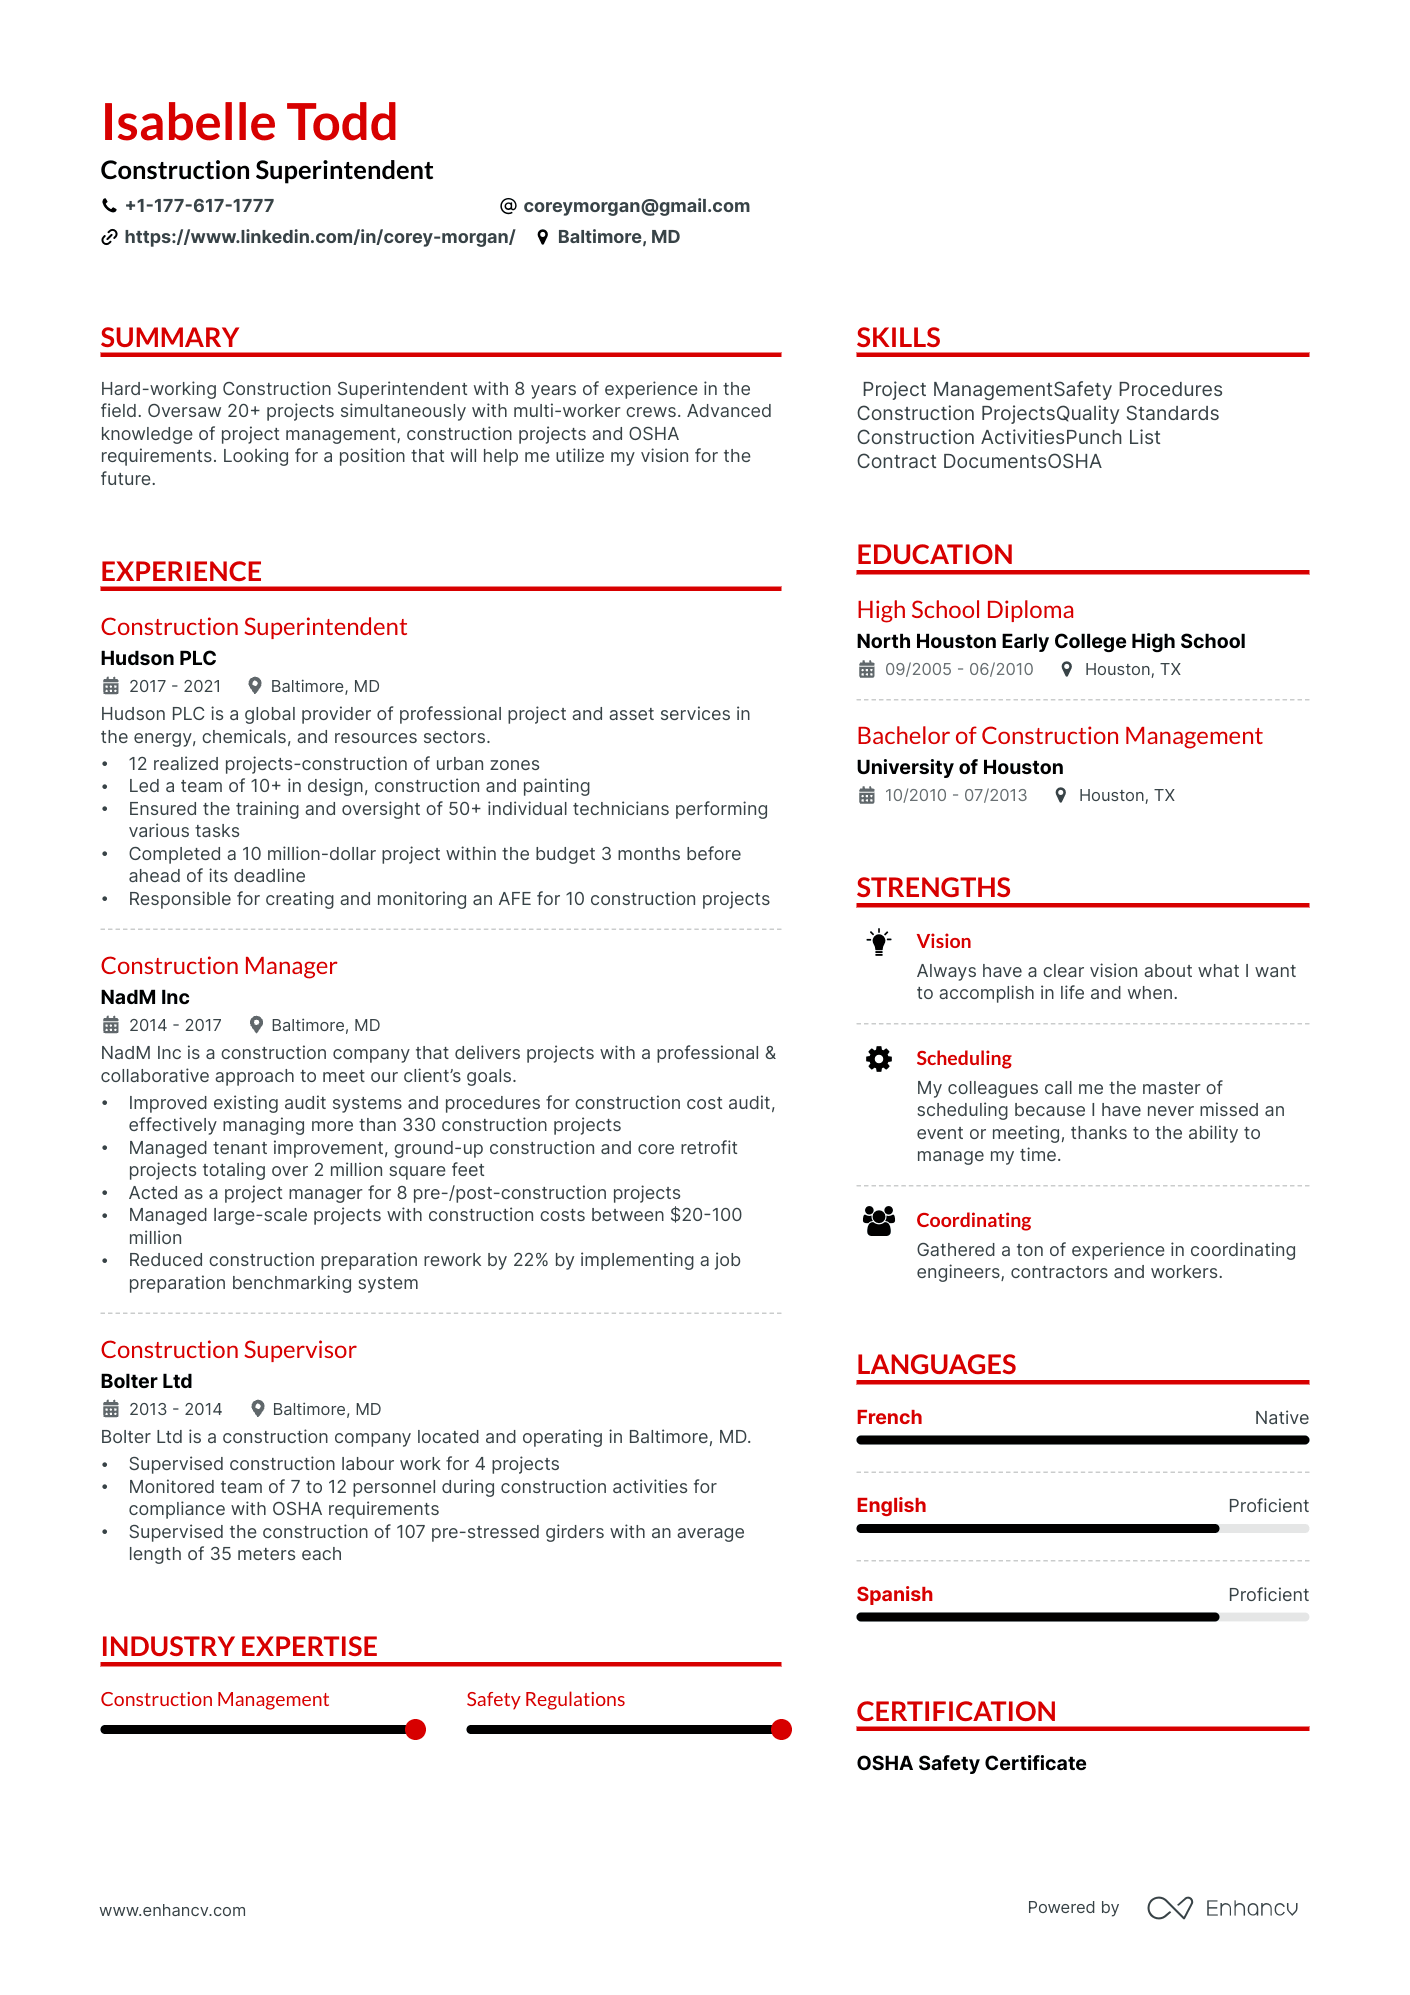 Construction Superintendent resume example